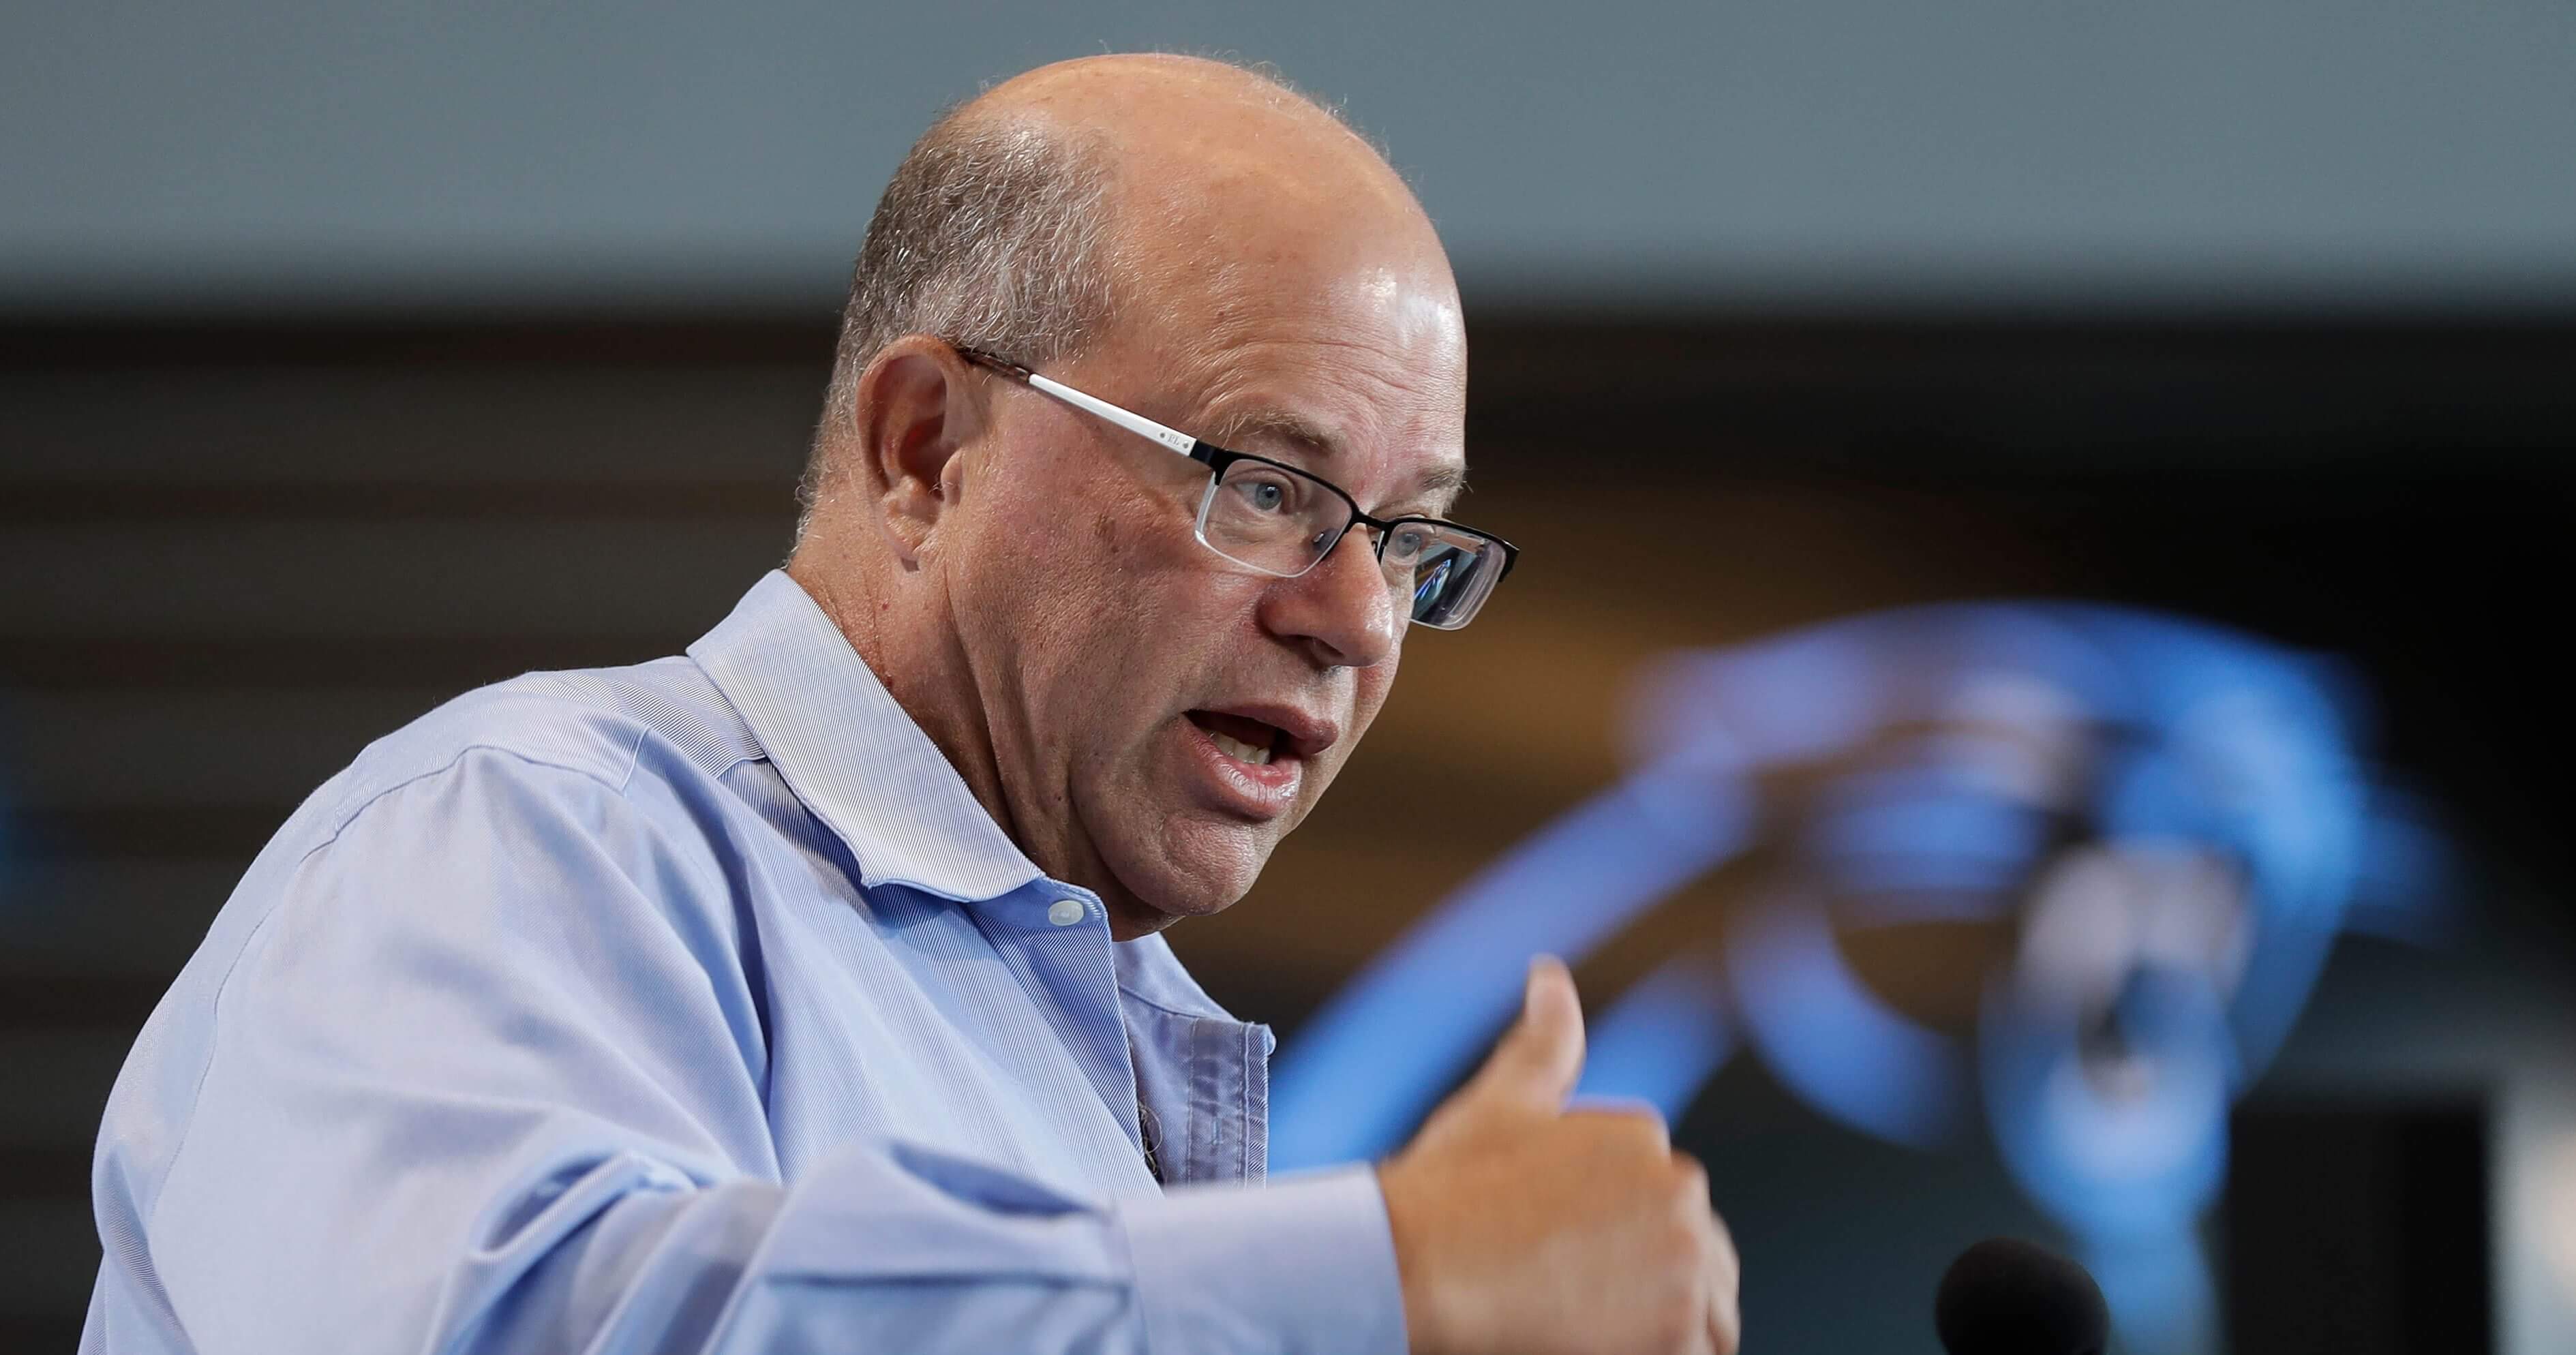 New Carolina Panthers owner David Tepper answers a question during a news conference at Bank of America Stadium in Charlotte, N.C., Tuesday, July 10, 2018. Tepper finalized his purchase of the team on Monday.